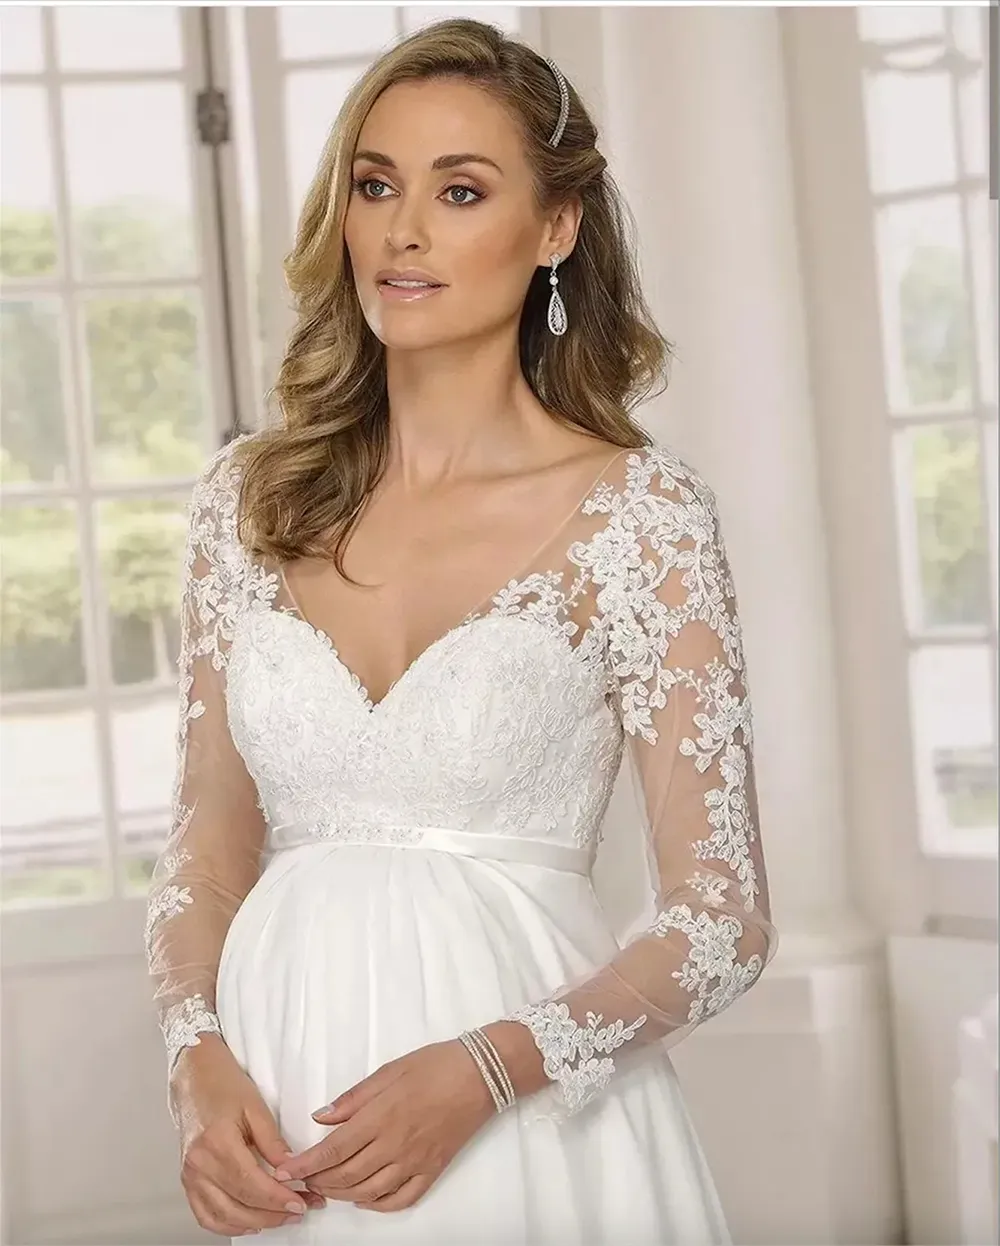 2023 Boho Lace Applique Maternity Bridal Gown - V-Neck Chiffon A-Line Dress  with Long Illusion Sleeves for Pregnant Brides